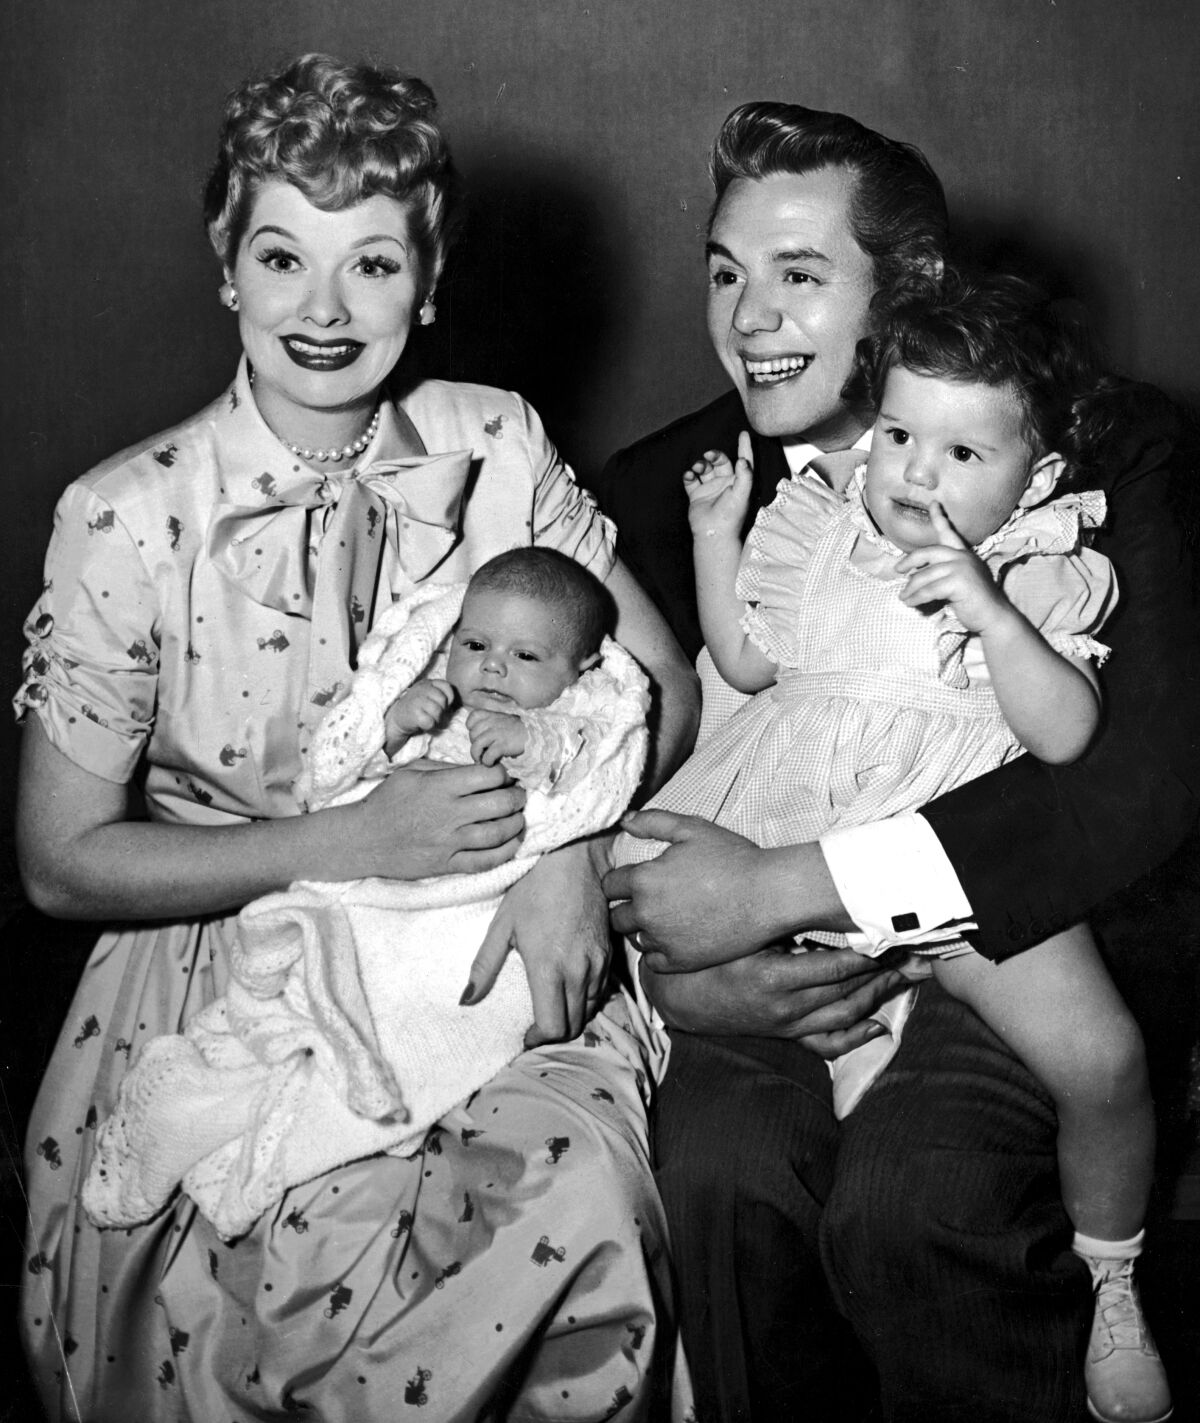 Lucille Ball and her husband, Desi Arnaz, laugh and smile while holding their two children, Desi Jr. and Lucie in 1953.